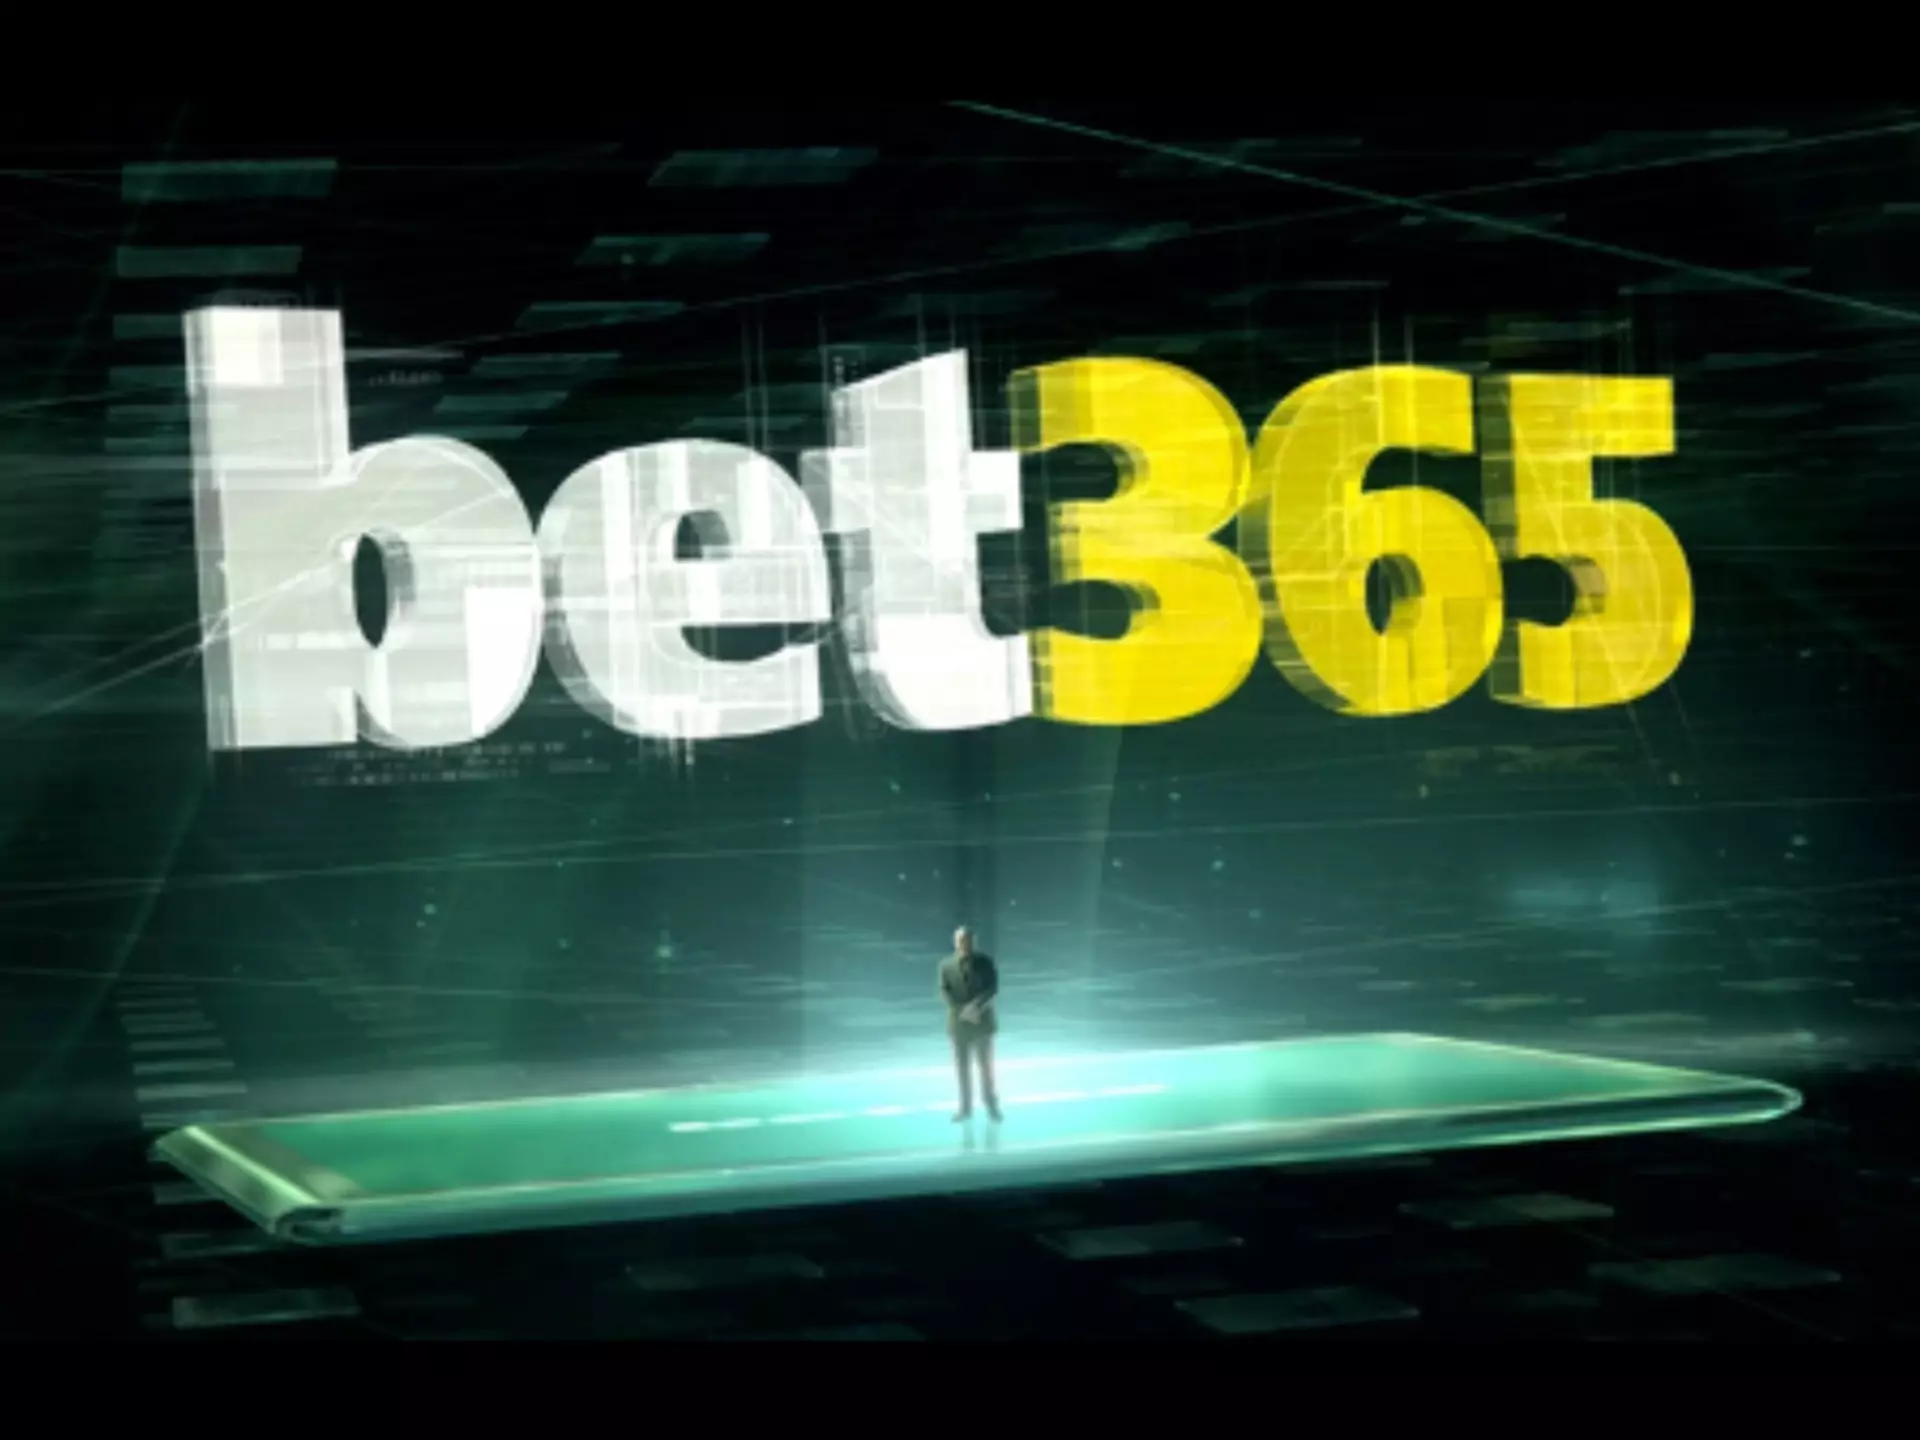 Consider all pros and cons before registering at bet365.